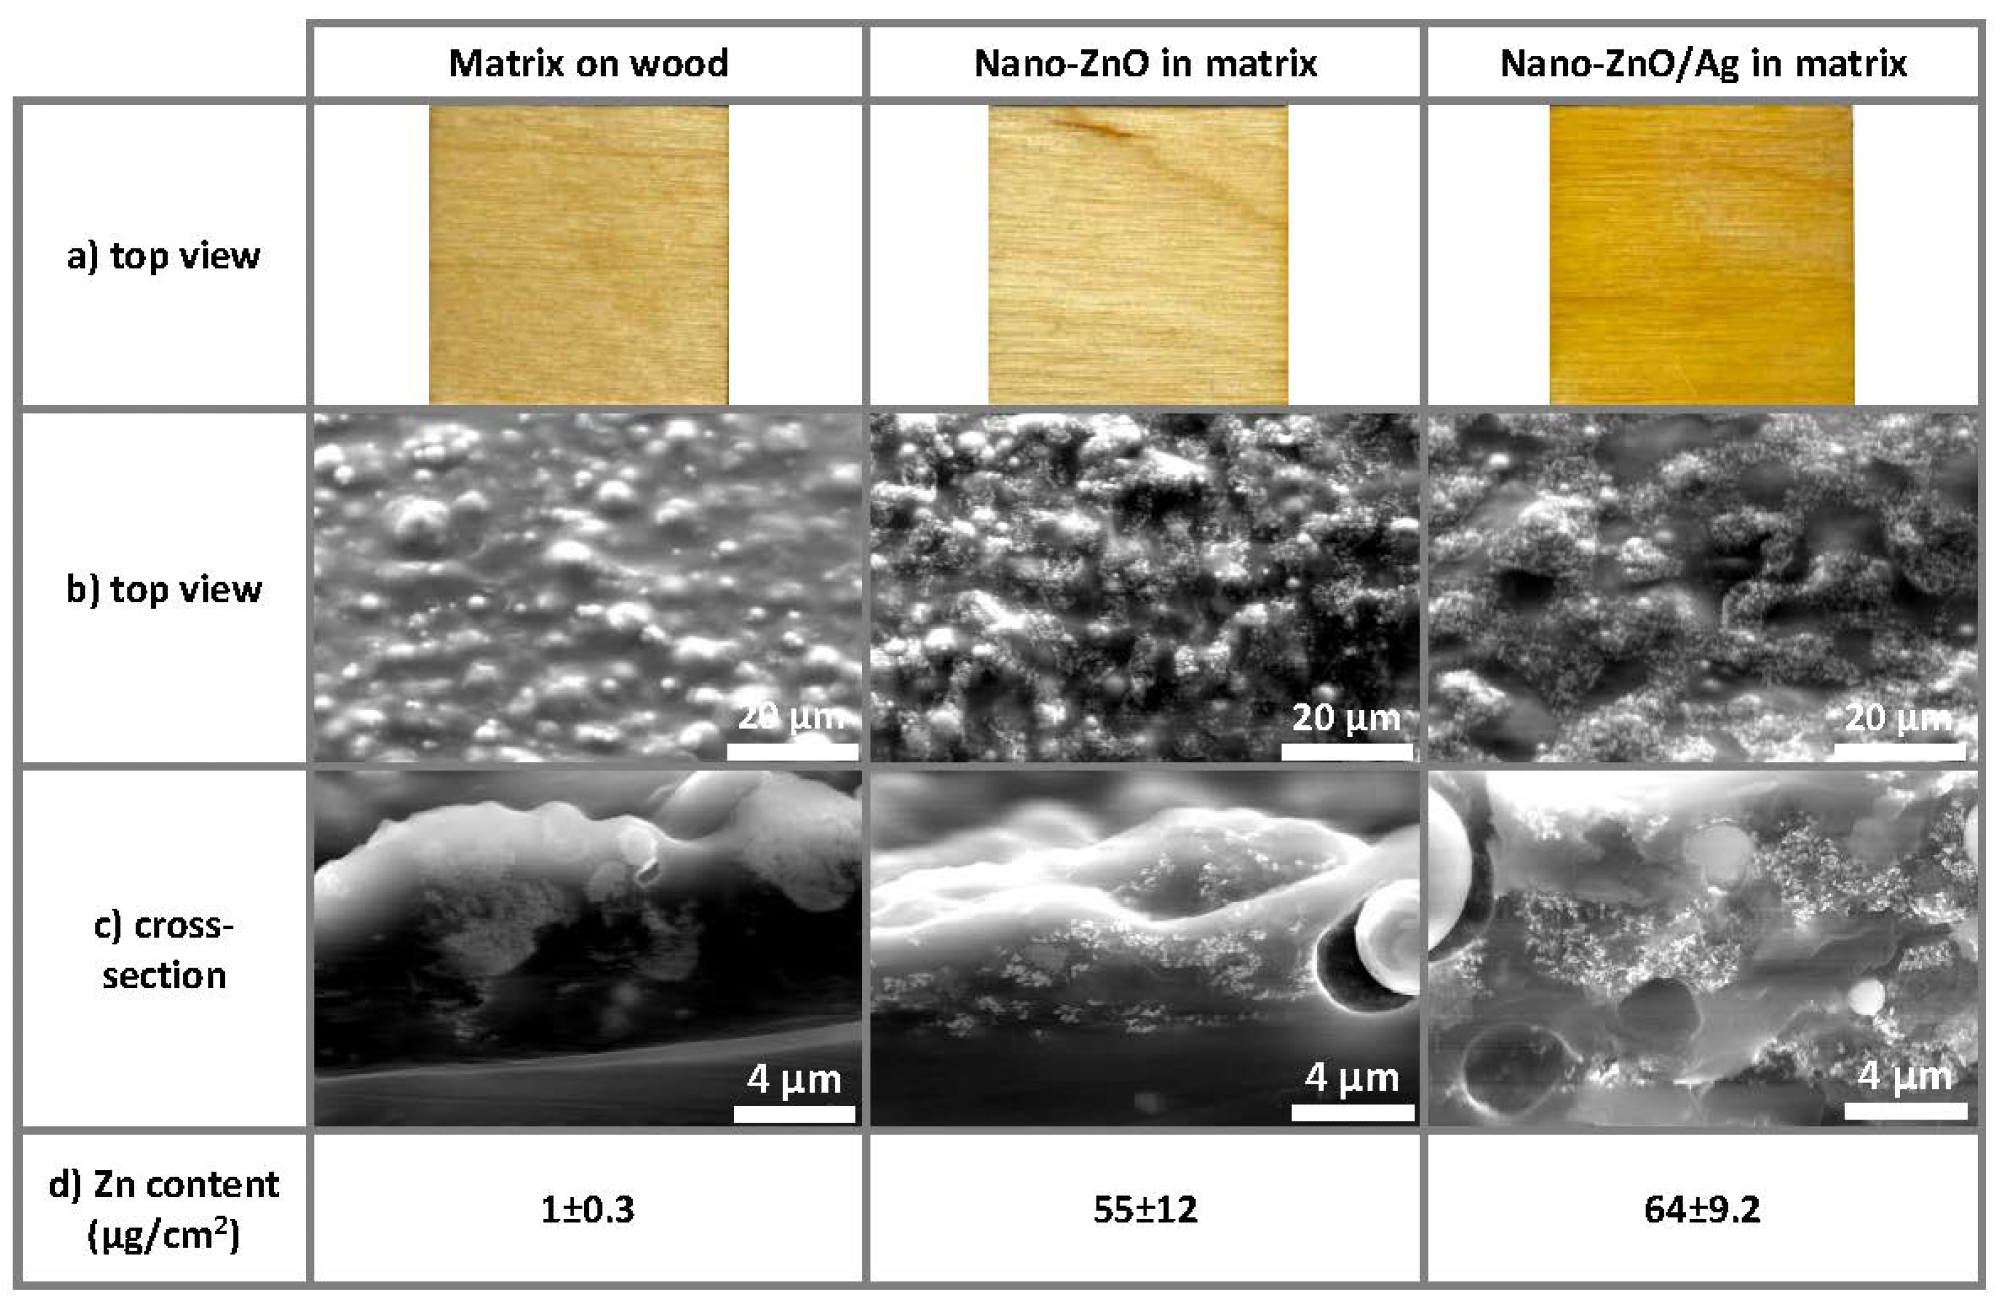 Photographic images, SEM images and XRF analysis data of coatings on wooden substrates: (a) photographic top view images of 25 × 25 mm samples reveal a more yellow coloring of nano-ZnO/Ag-based coatings compared to nano-ZnO-based and pure matrix coatings; (b) top view and (c) cross-section SEM images reveal a similar distribution for both nano-ZnO- and nano-ZnO/Ag-embedded nanoparticles; (d) Zn content (µg/cm2) was determined using X-ray fluorescence spectroscopy. Zn content in both nanoparticle-based coatings was similar and notably higher compared to the control (pure matrix-covered substrate).